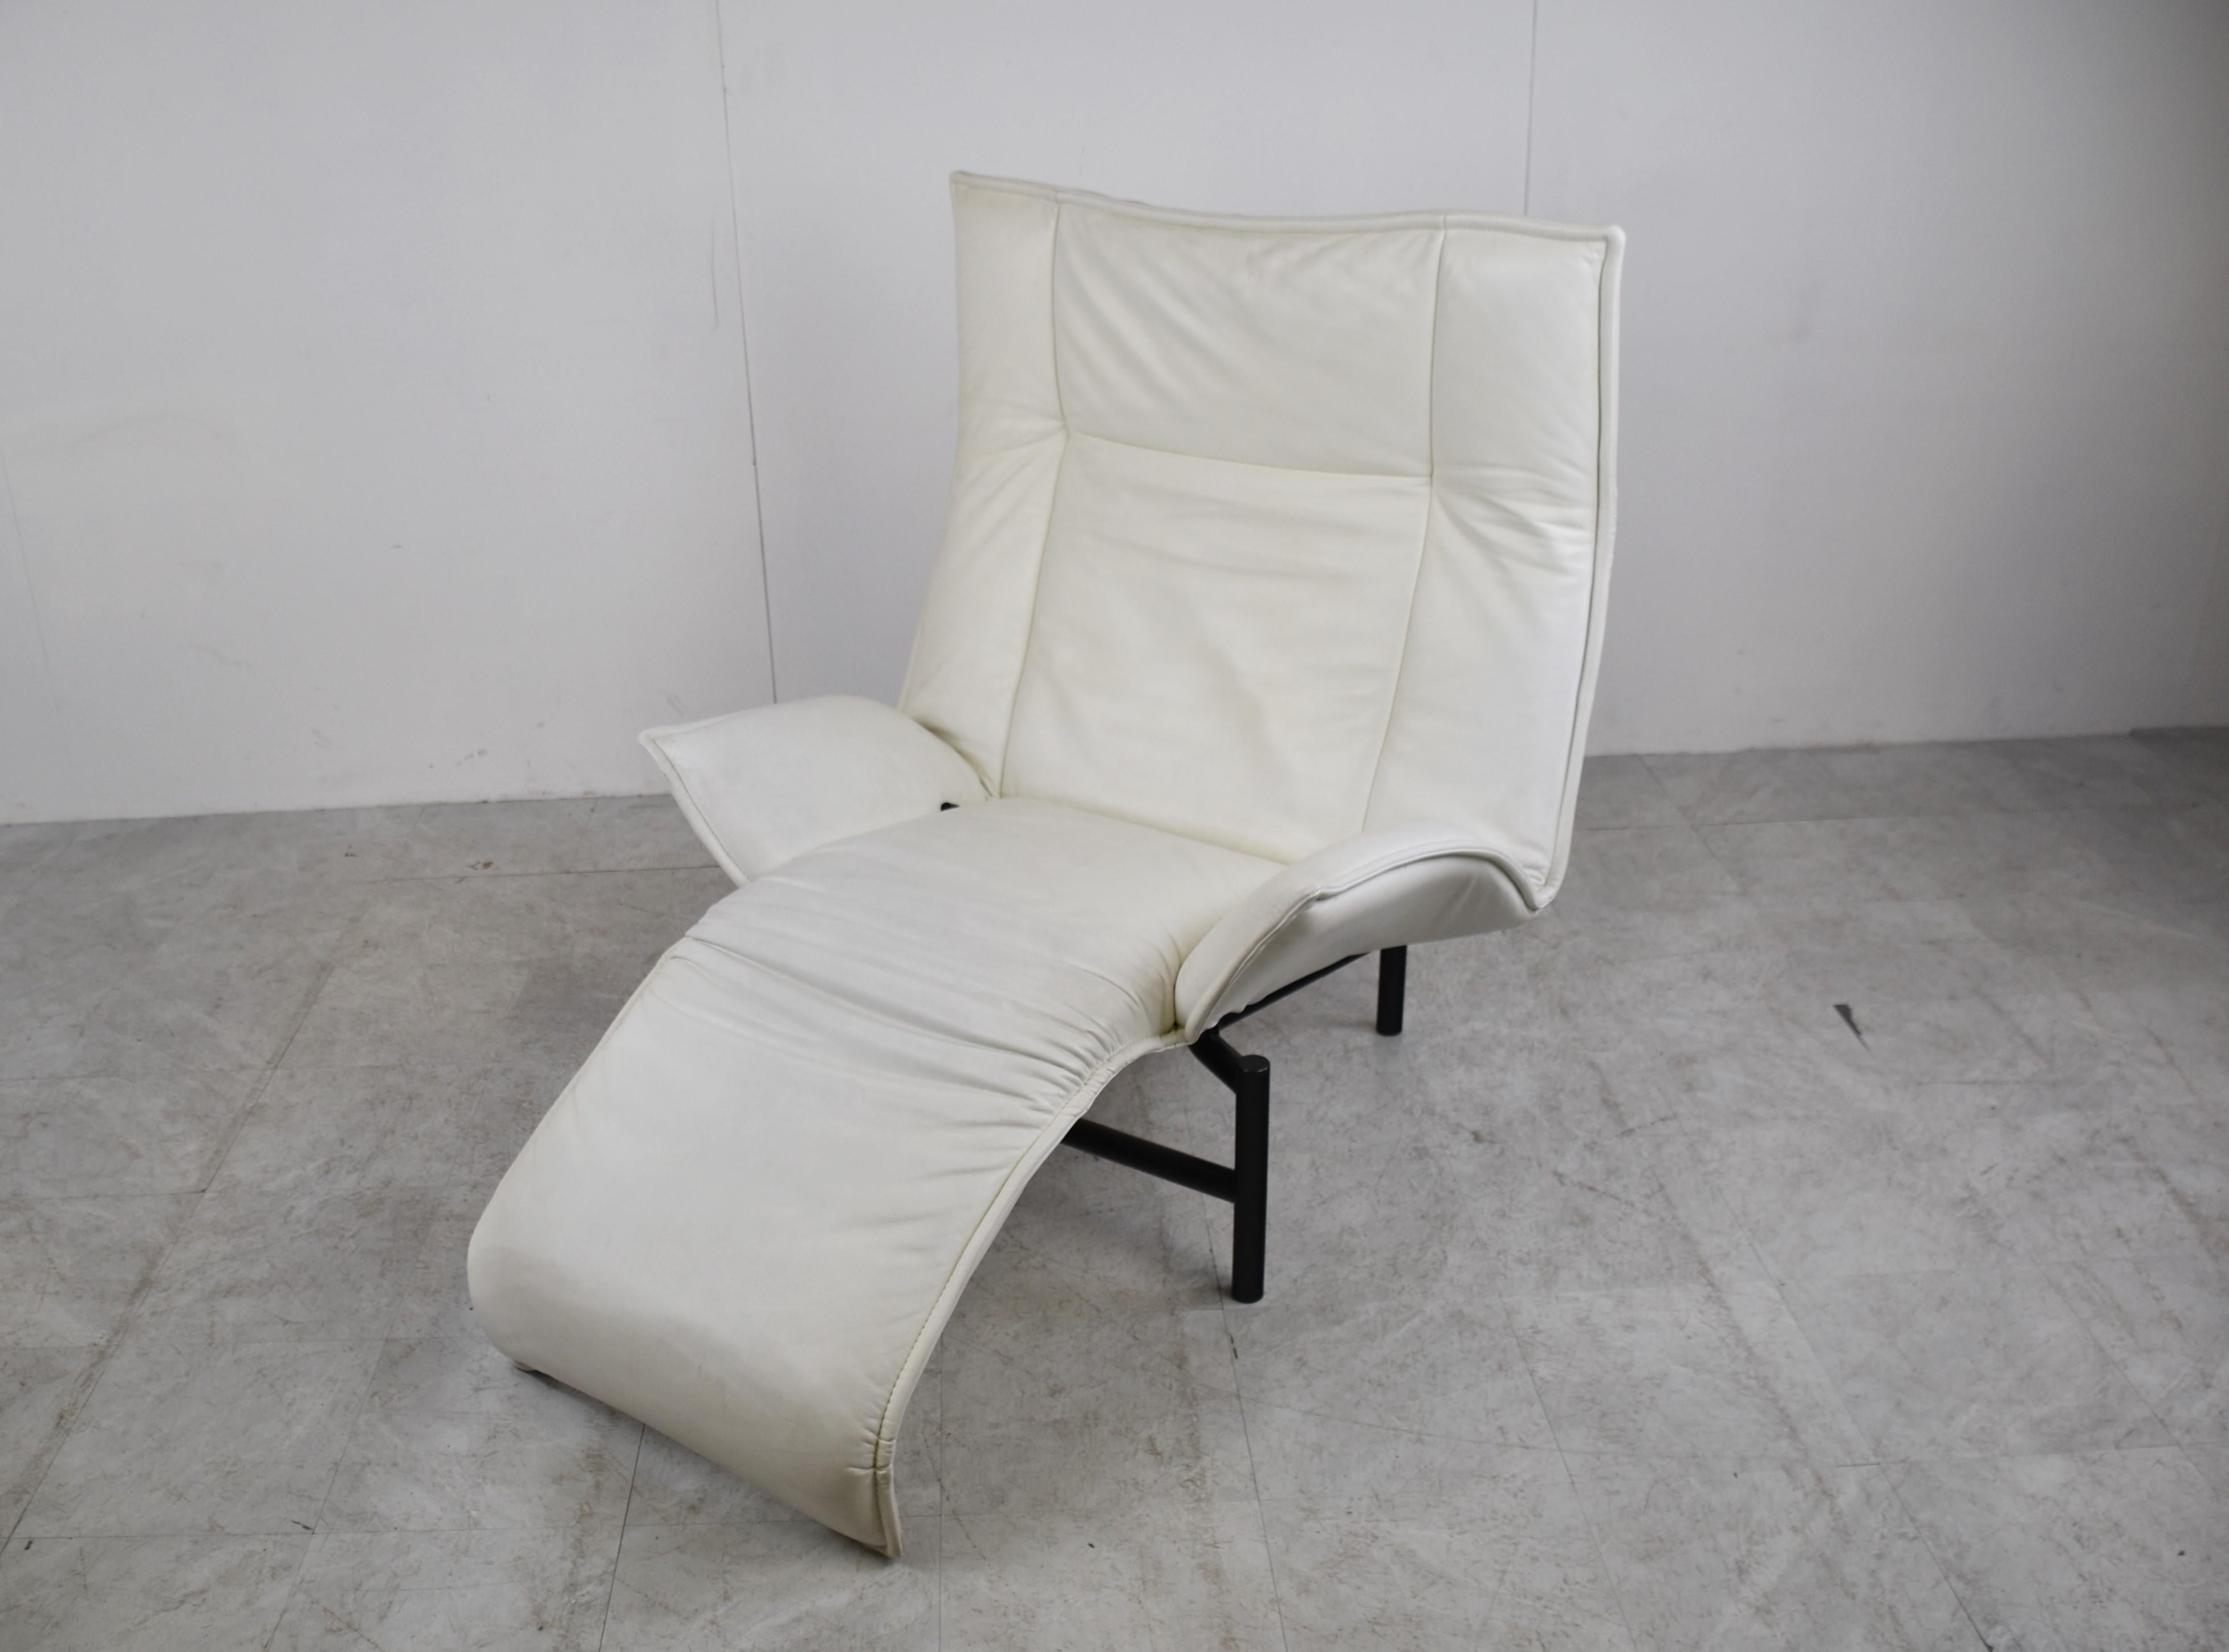 Vintage Leather Veranda Lounge Chair by Vico Magistretti for Cassina, 1980s For Sale 6